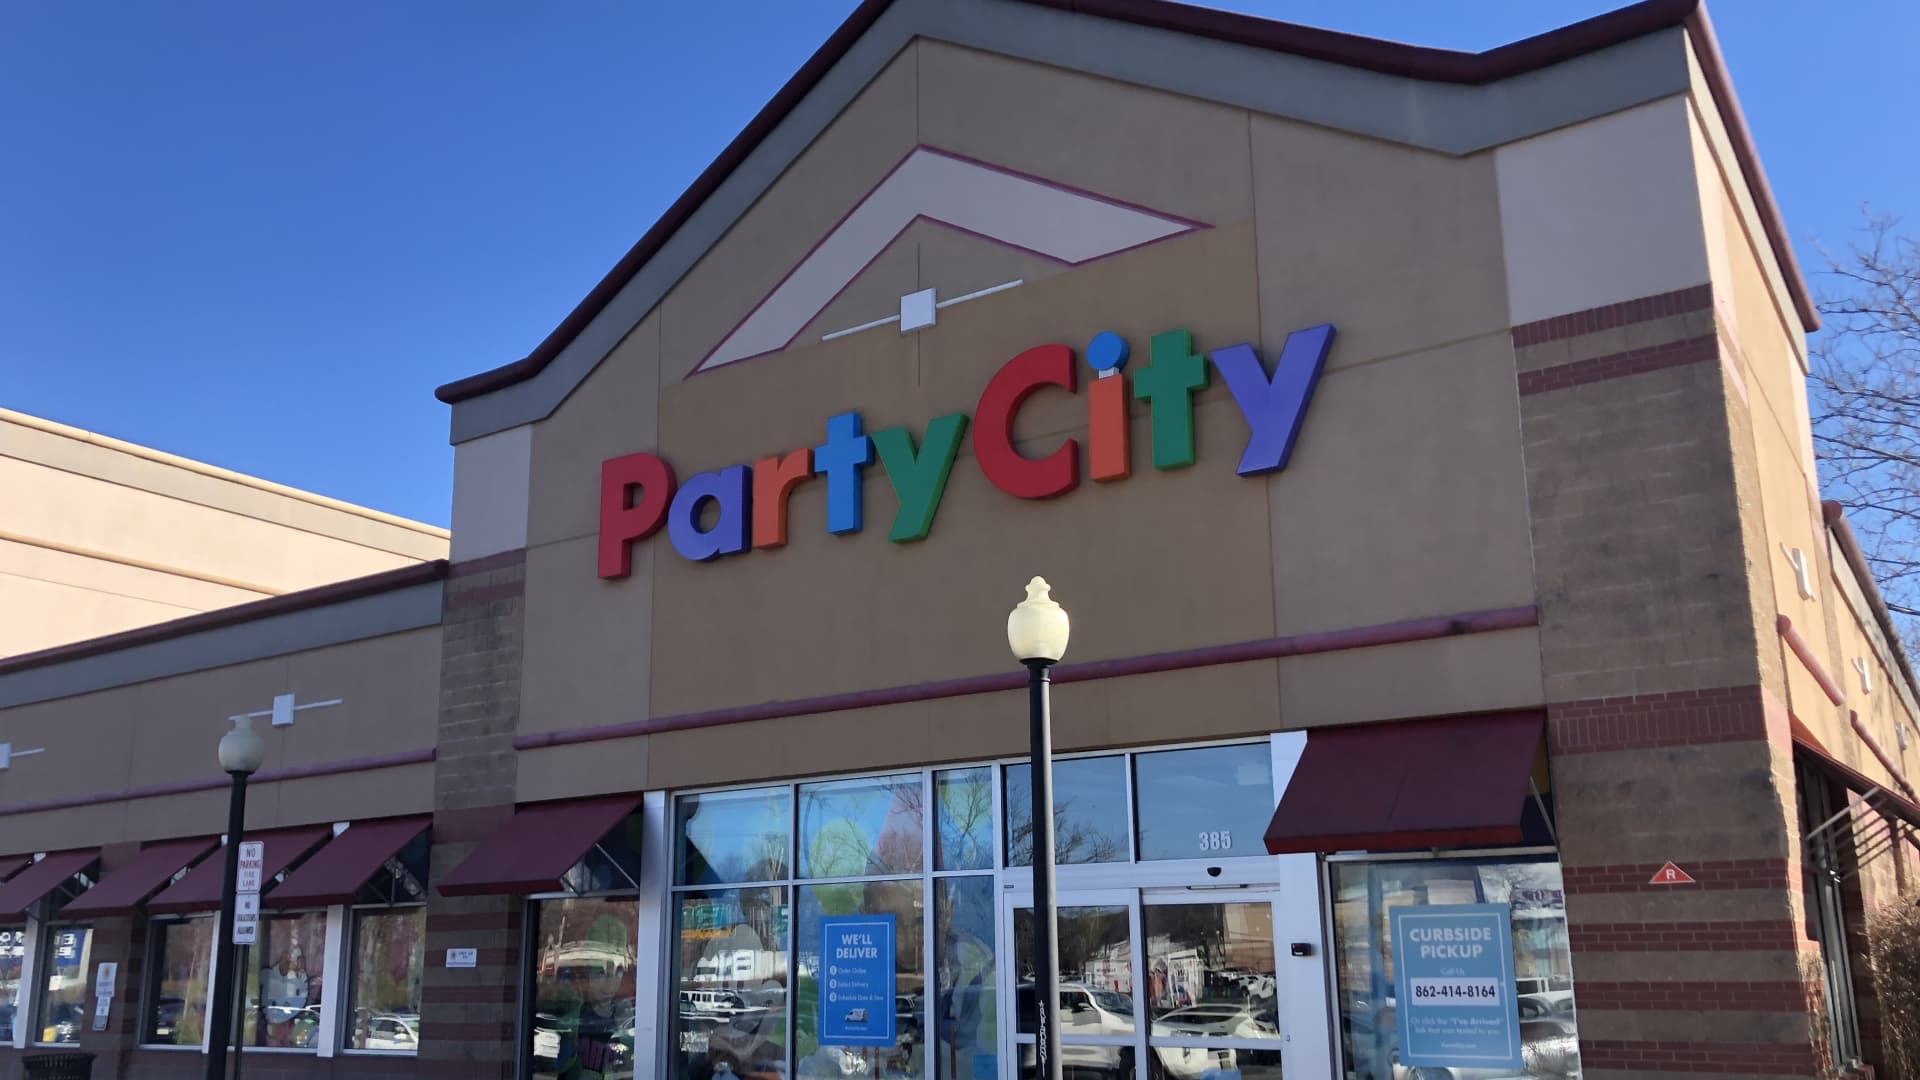 Party City files for bankruptcy to restructure piling debt – CNBC